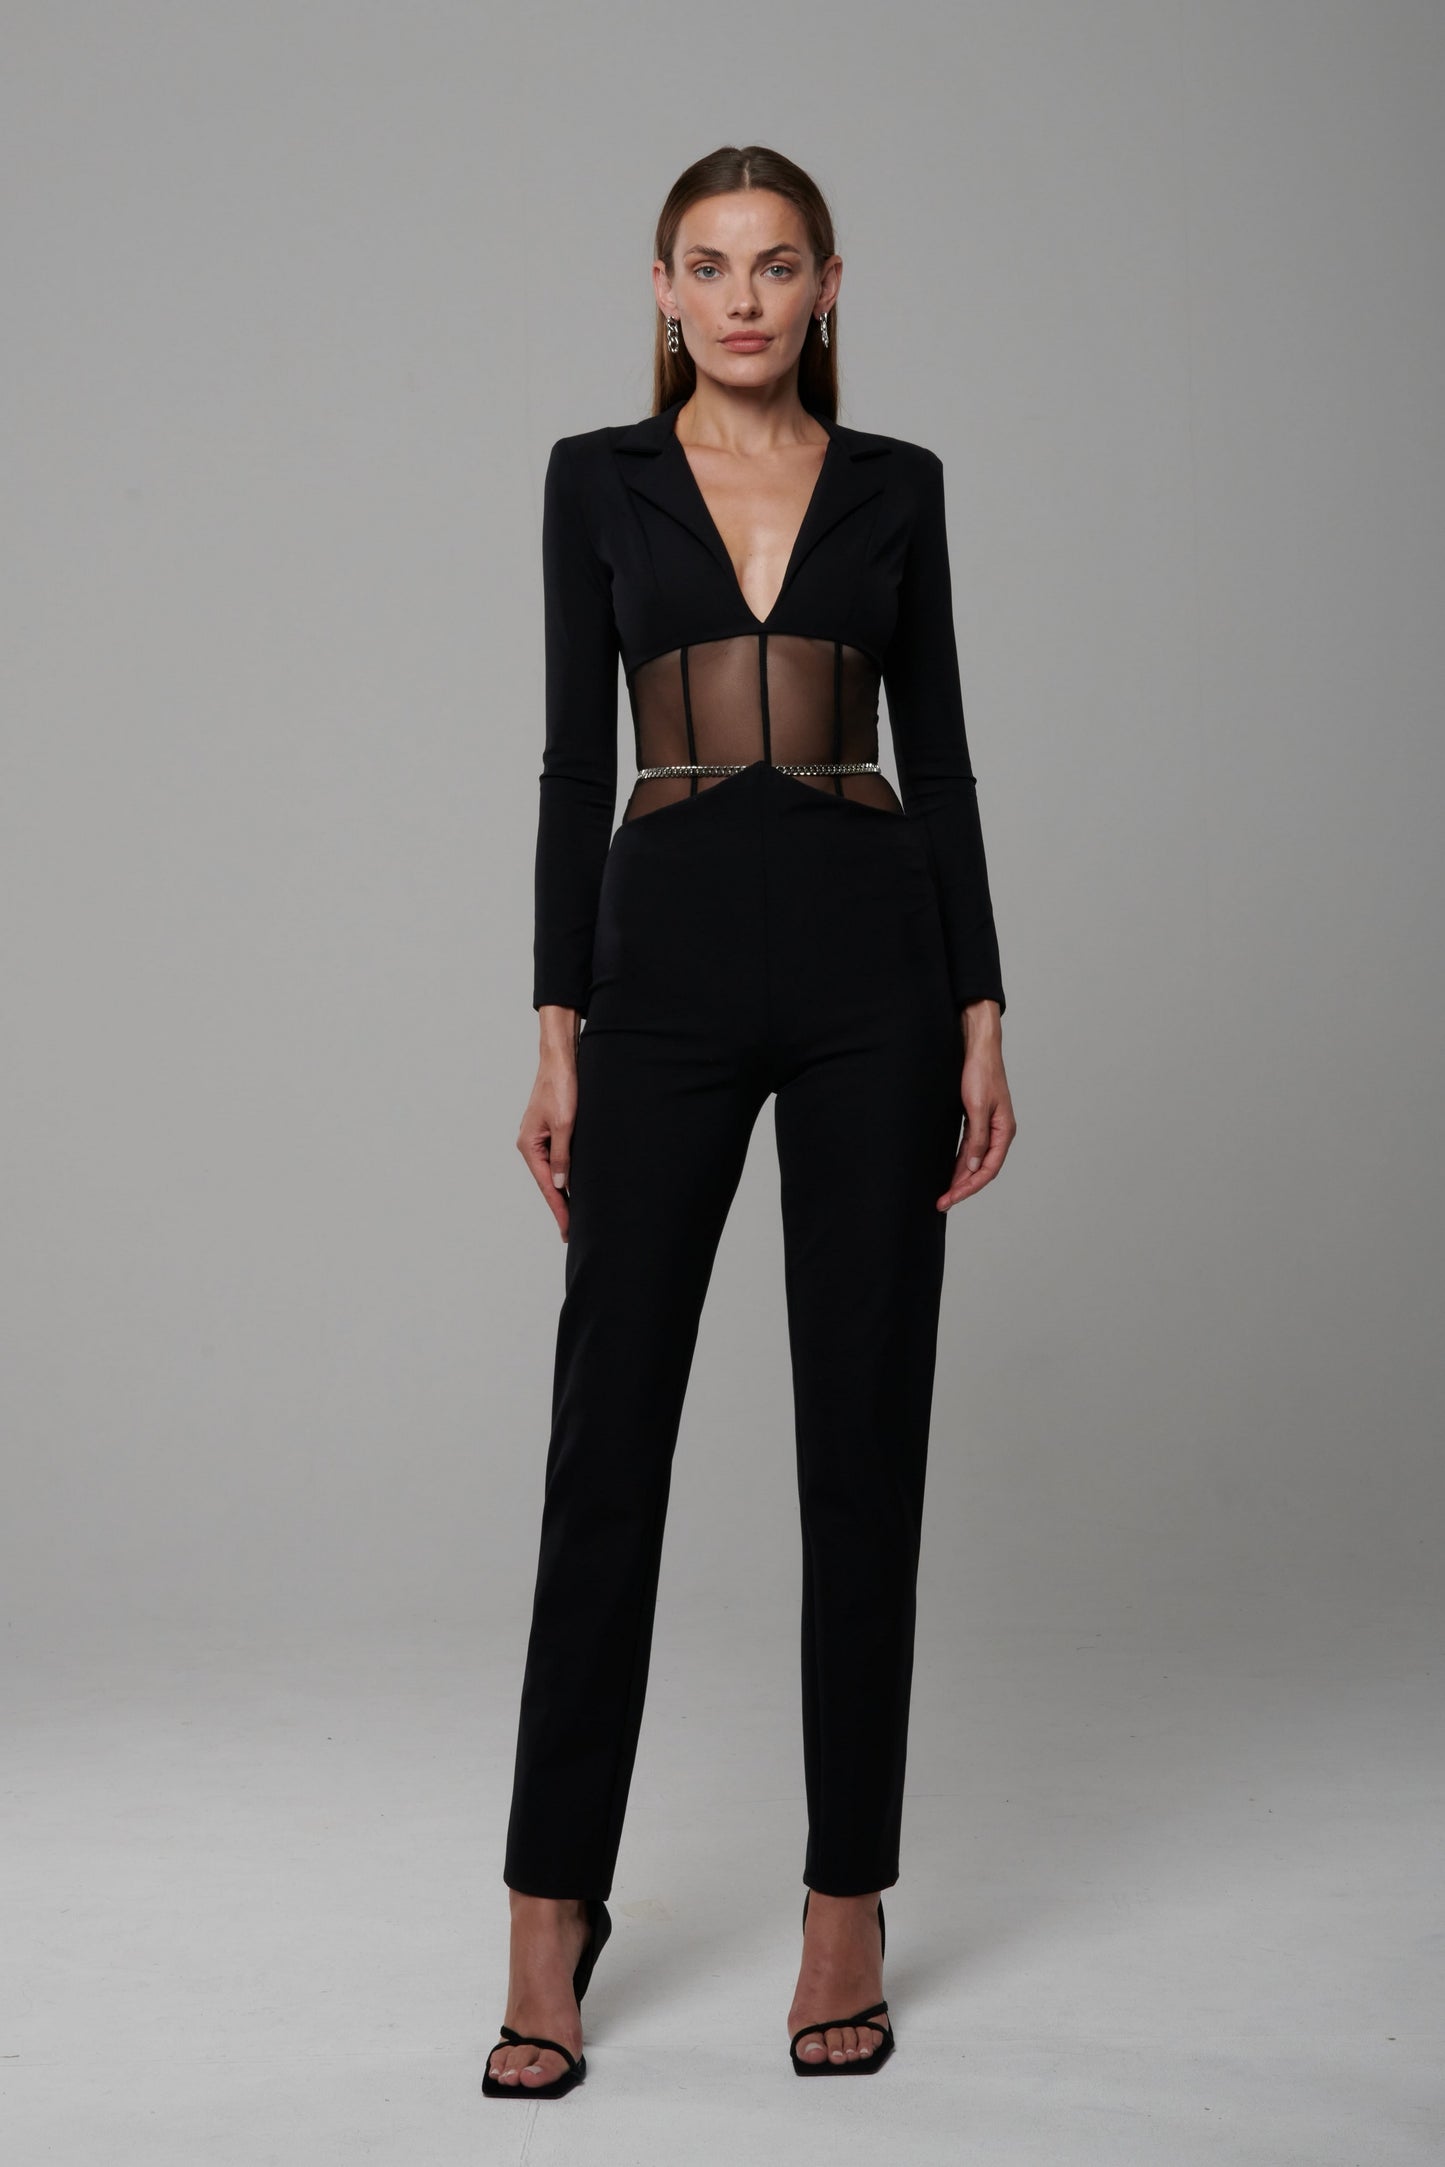 Chic At Every Age Featuring An Amazing Over-Sized Blazer  Lace bodysuit  outfit, Body suit outfits, Black lace bodysuit